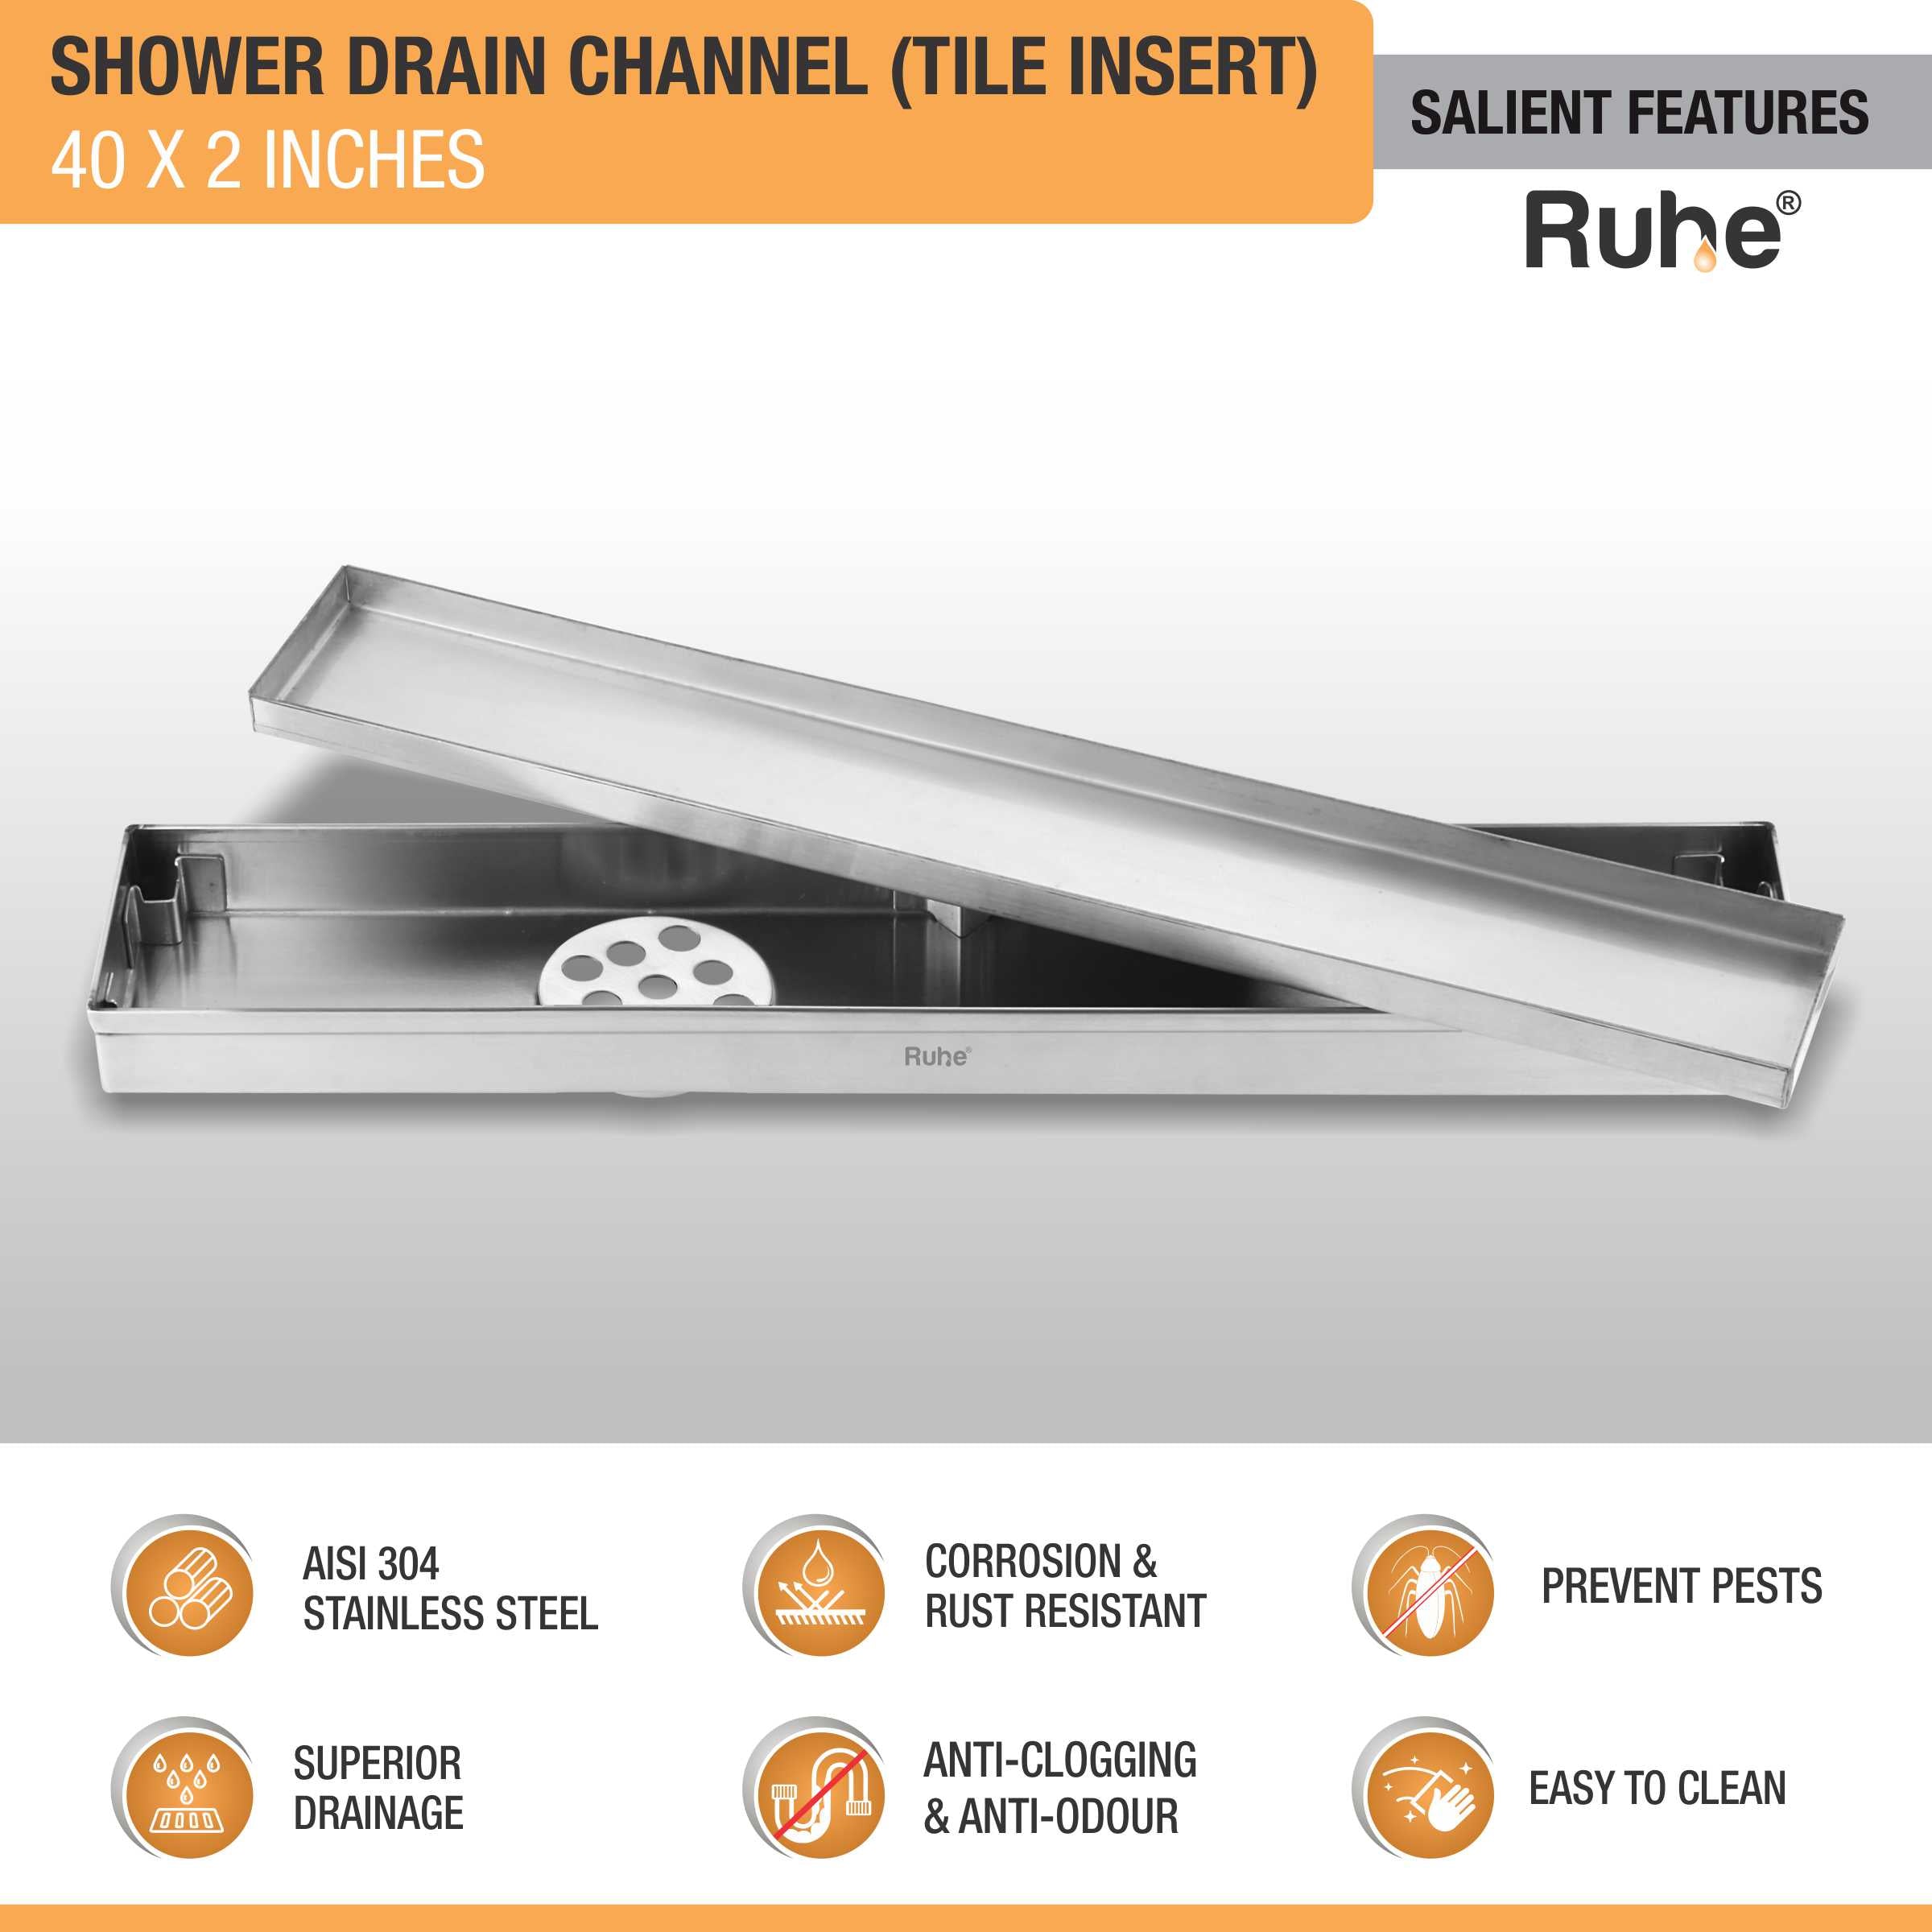 Tile Insert Shower Drain Channel (40 x 2 Inches) (304 Grade) features